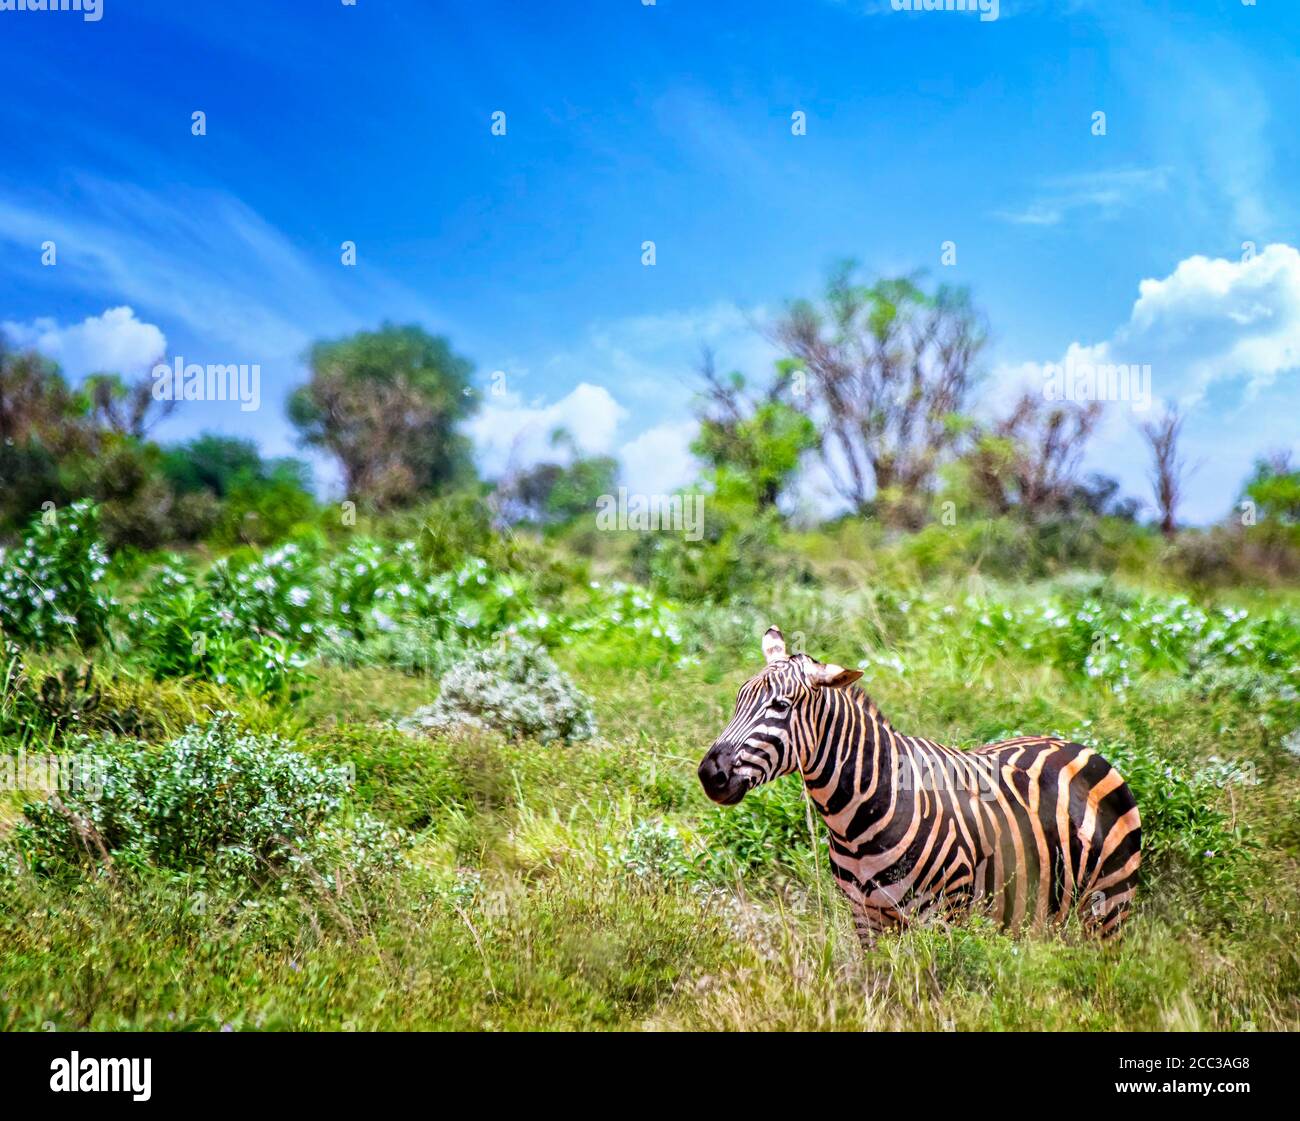 Grevy's zebra stands in the tall grass and sticks his tongue out. It is a wildlife photo in Africa, Kenya, Tsavo East National park. Stock Photo